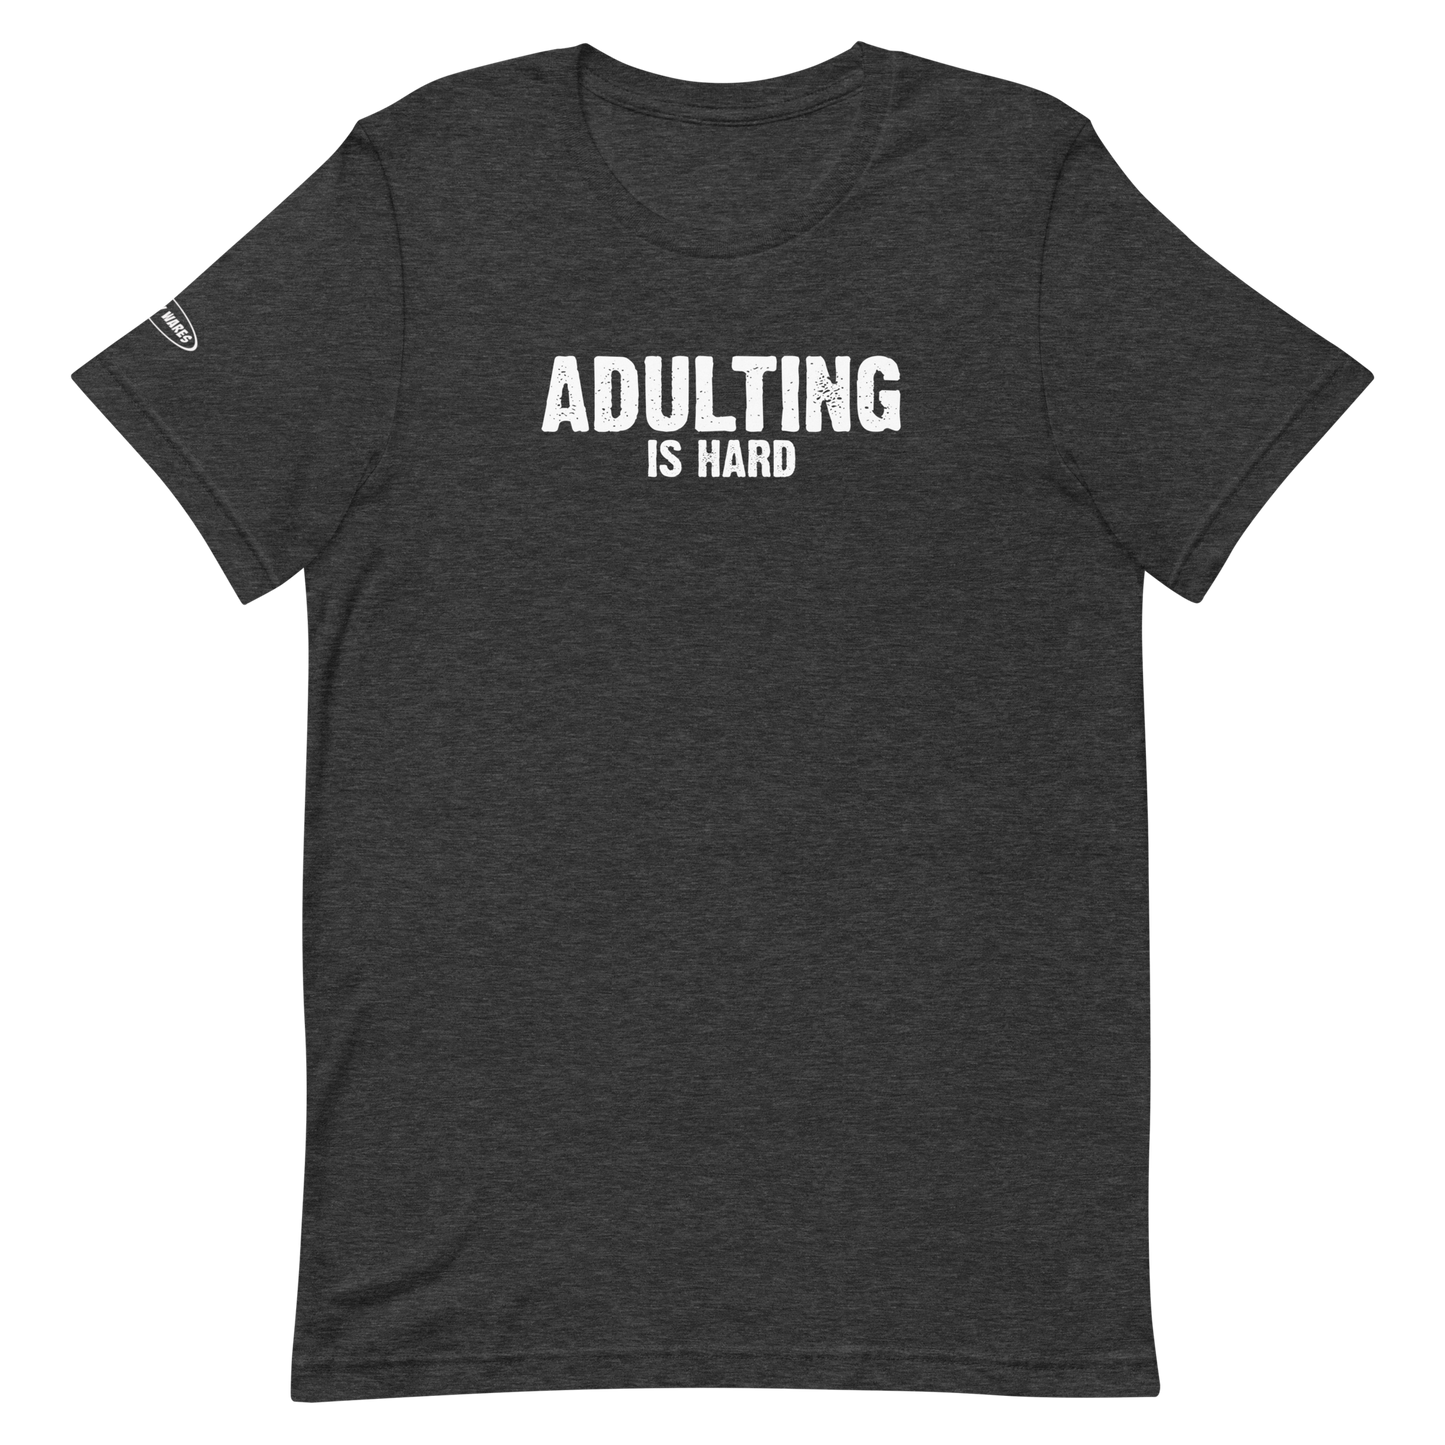 Unisex - Adulting Is Hard - Funny T-Shirt